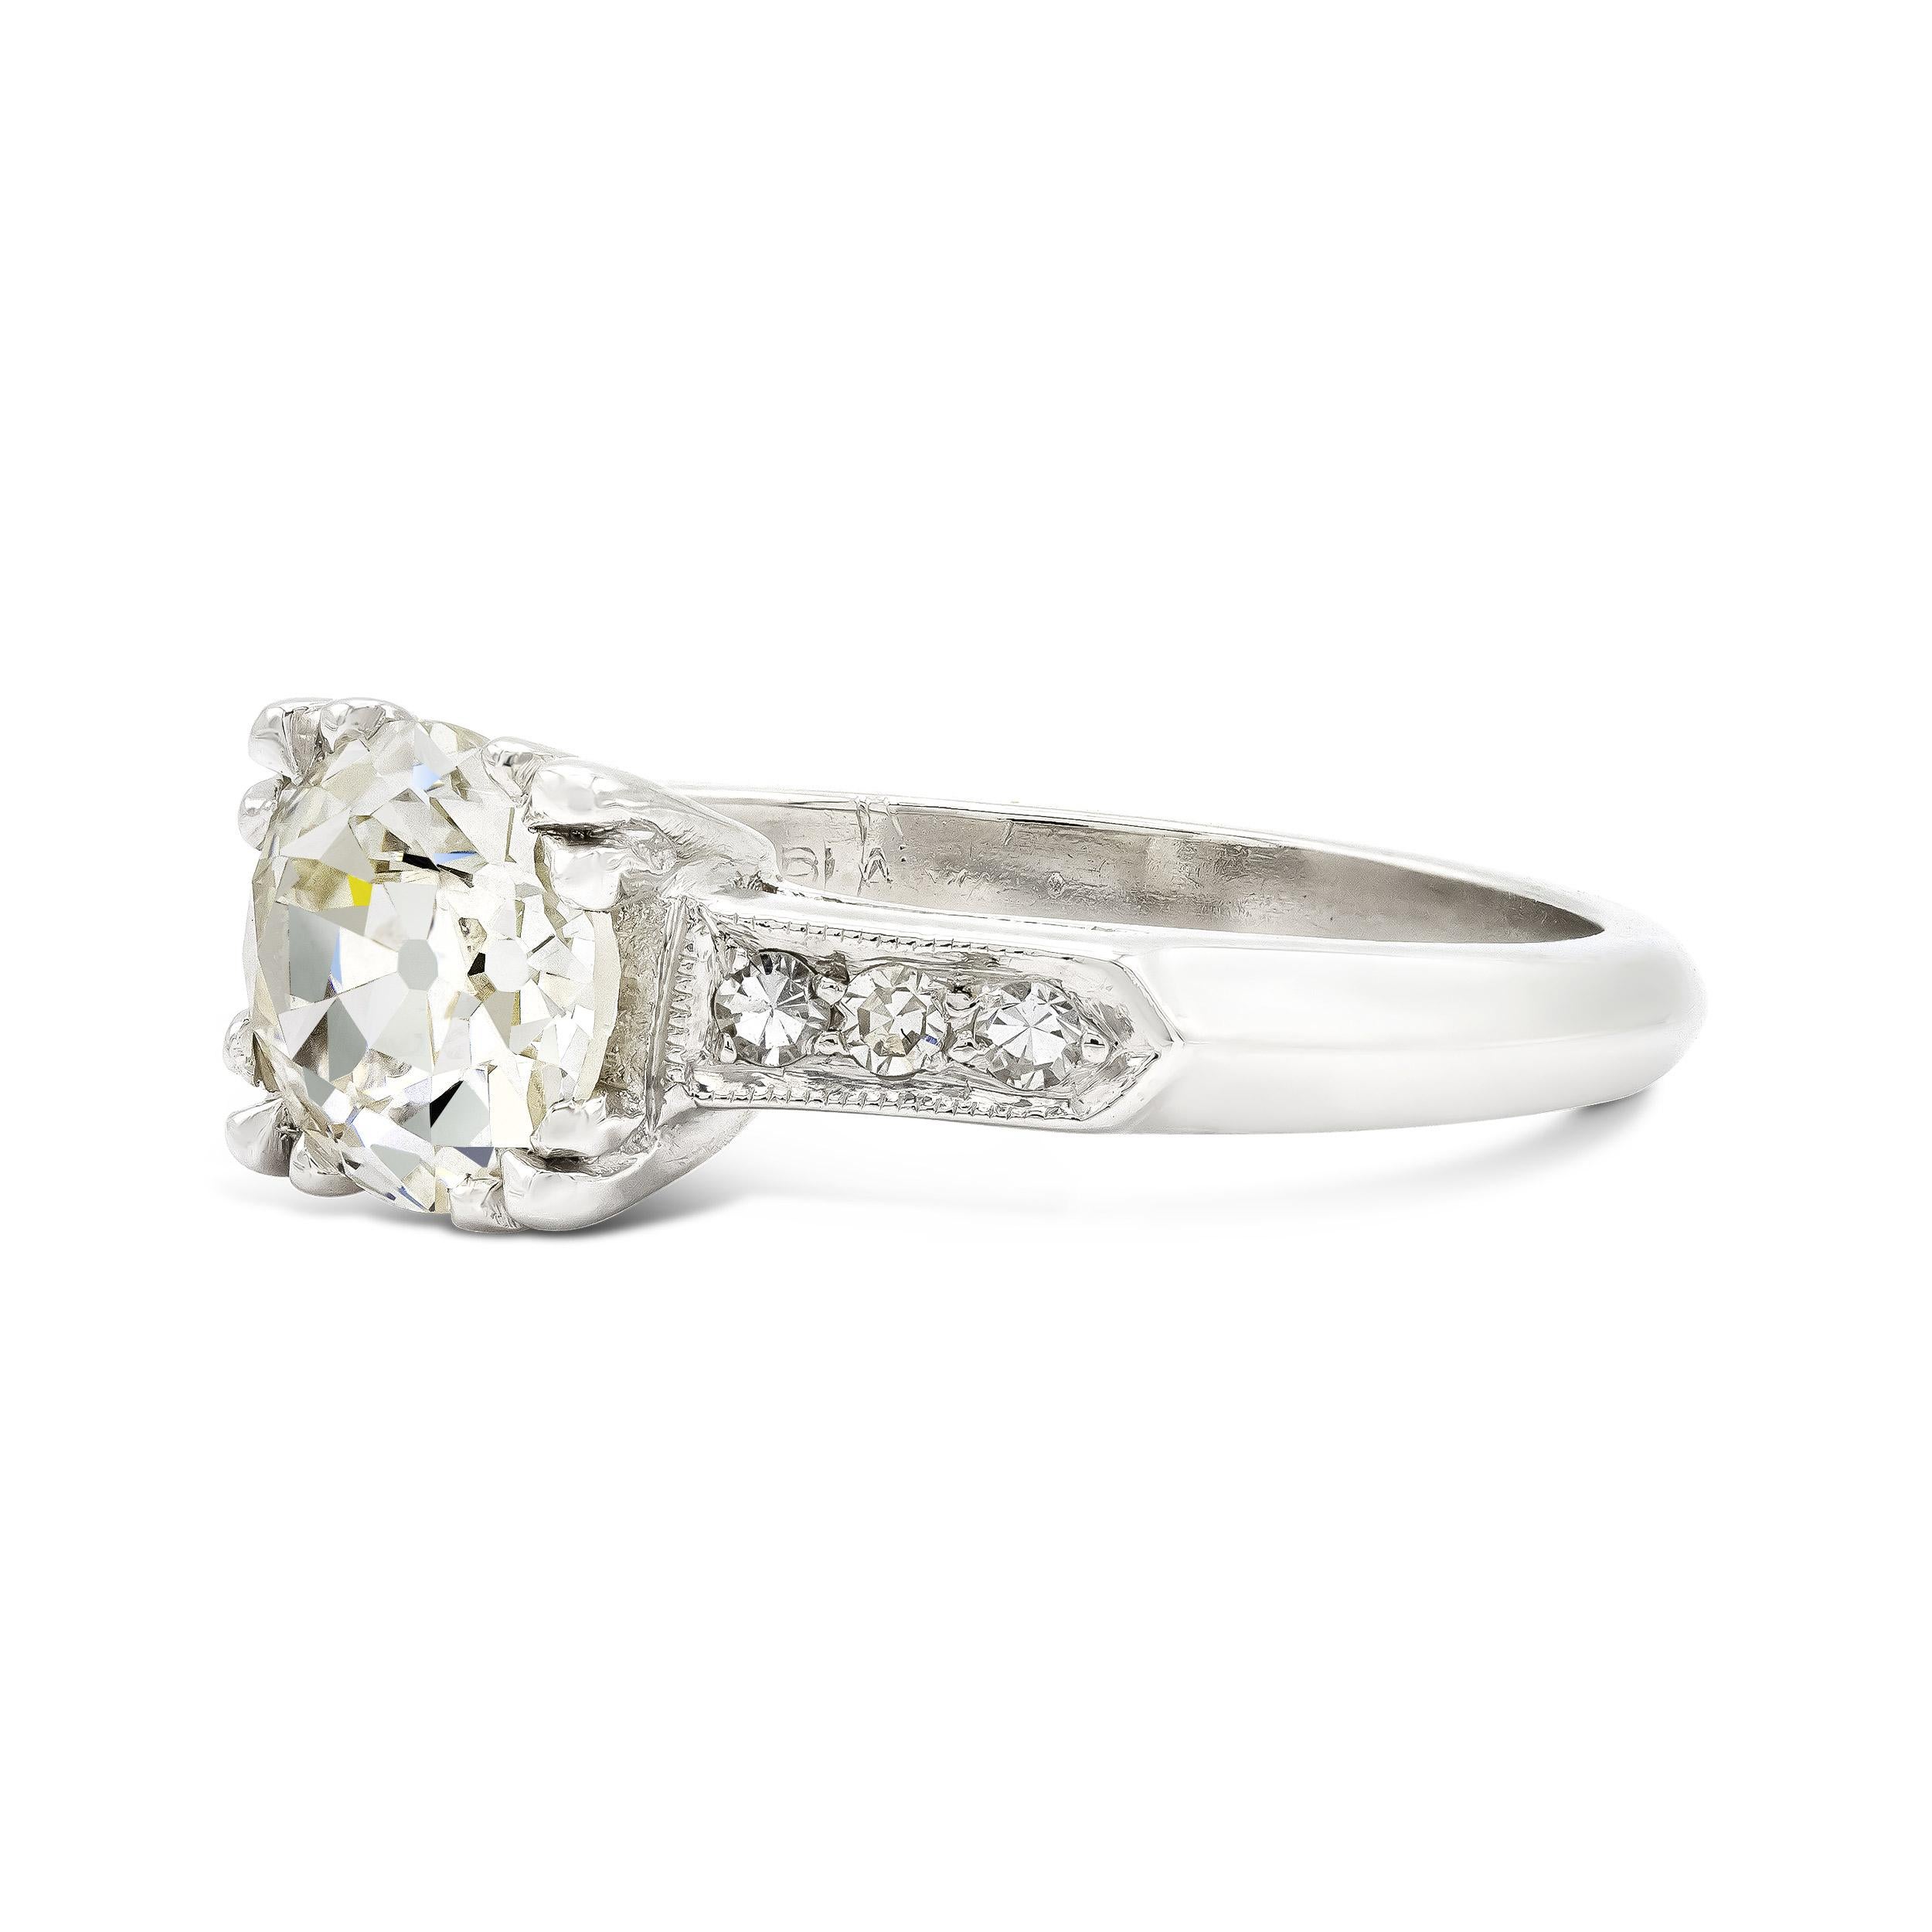 This lovely antique engagement ring has all the art deco elements we love. The platinum setting, milgraine edging, and fishtail prongs will delight any vintage enthusiast as will the 1.40-carat old European diamond beauty at its center.

Diamond